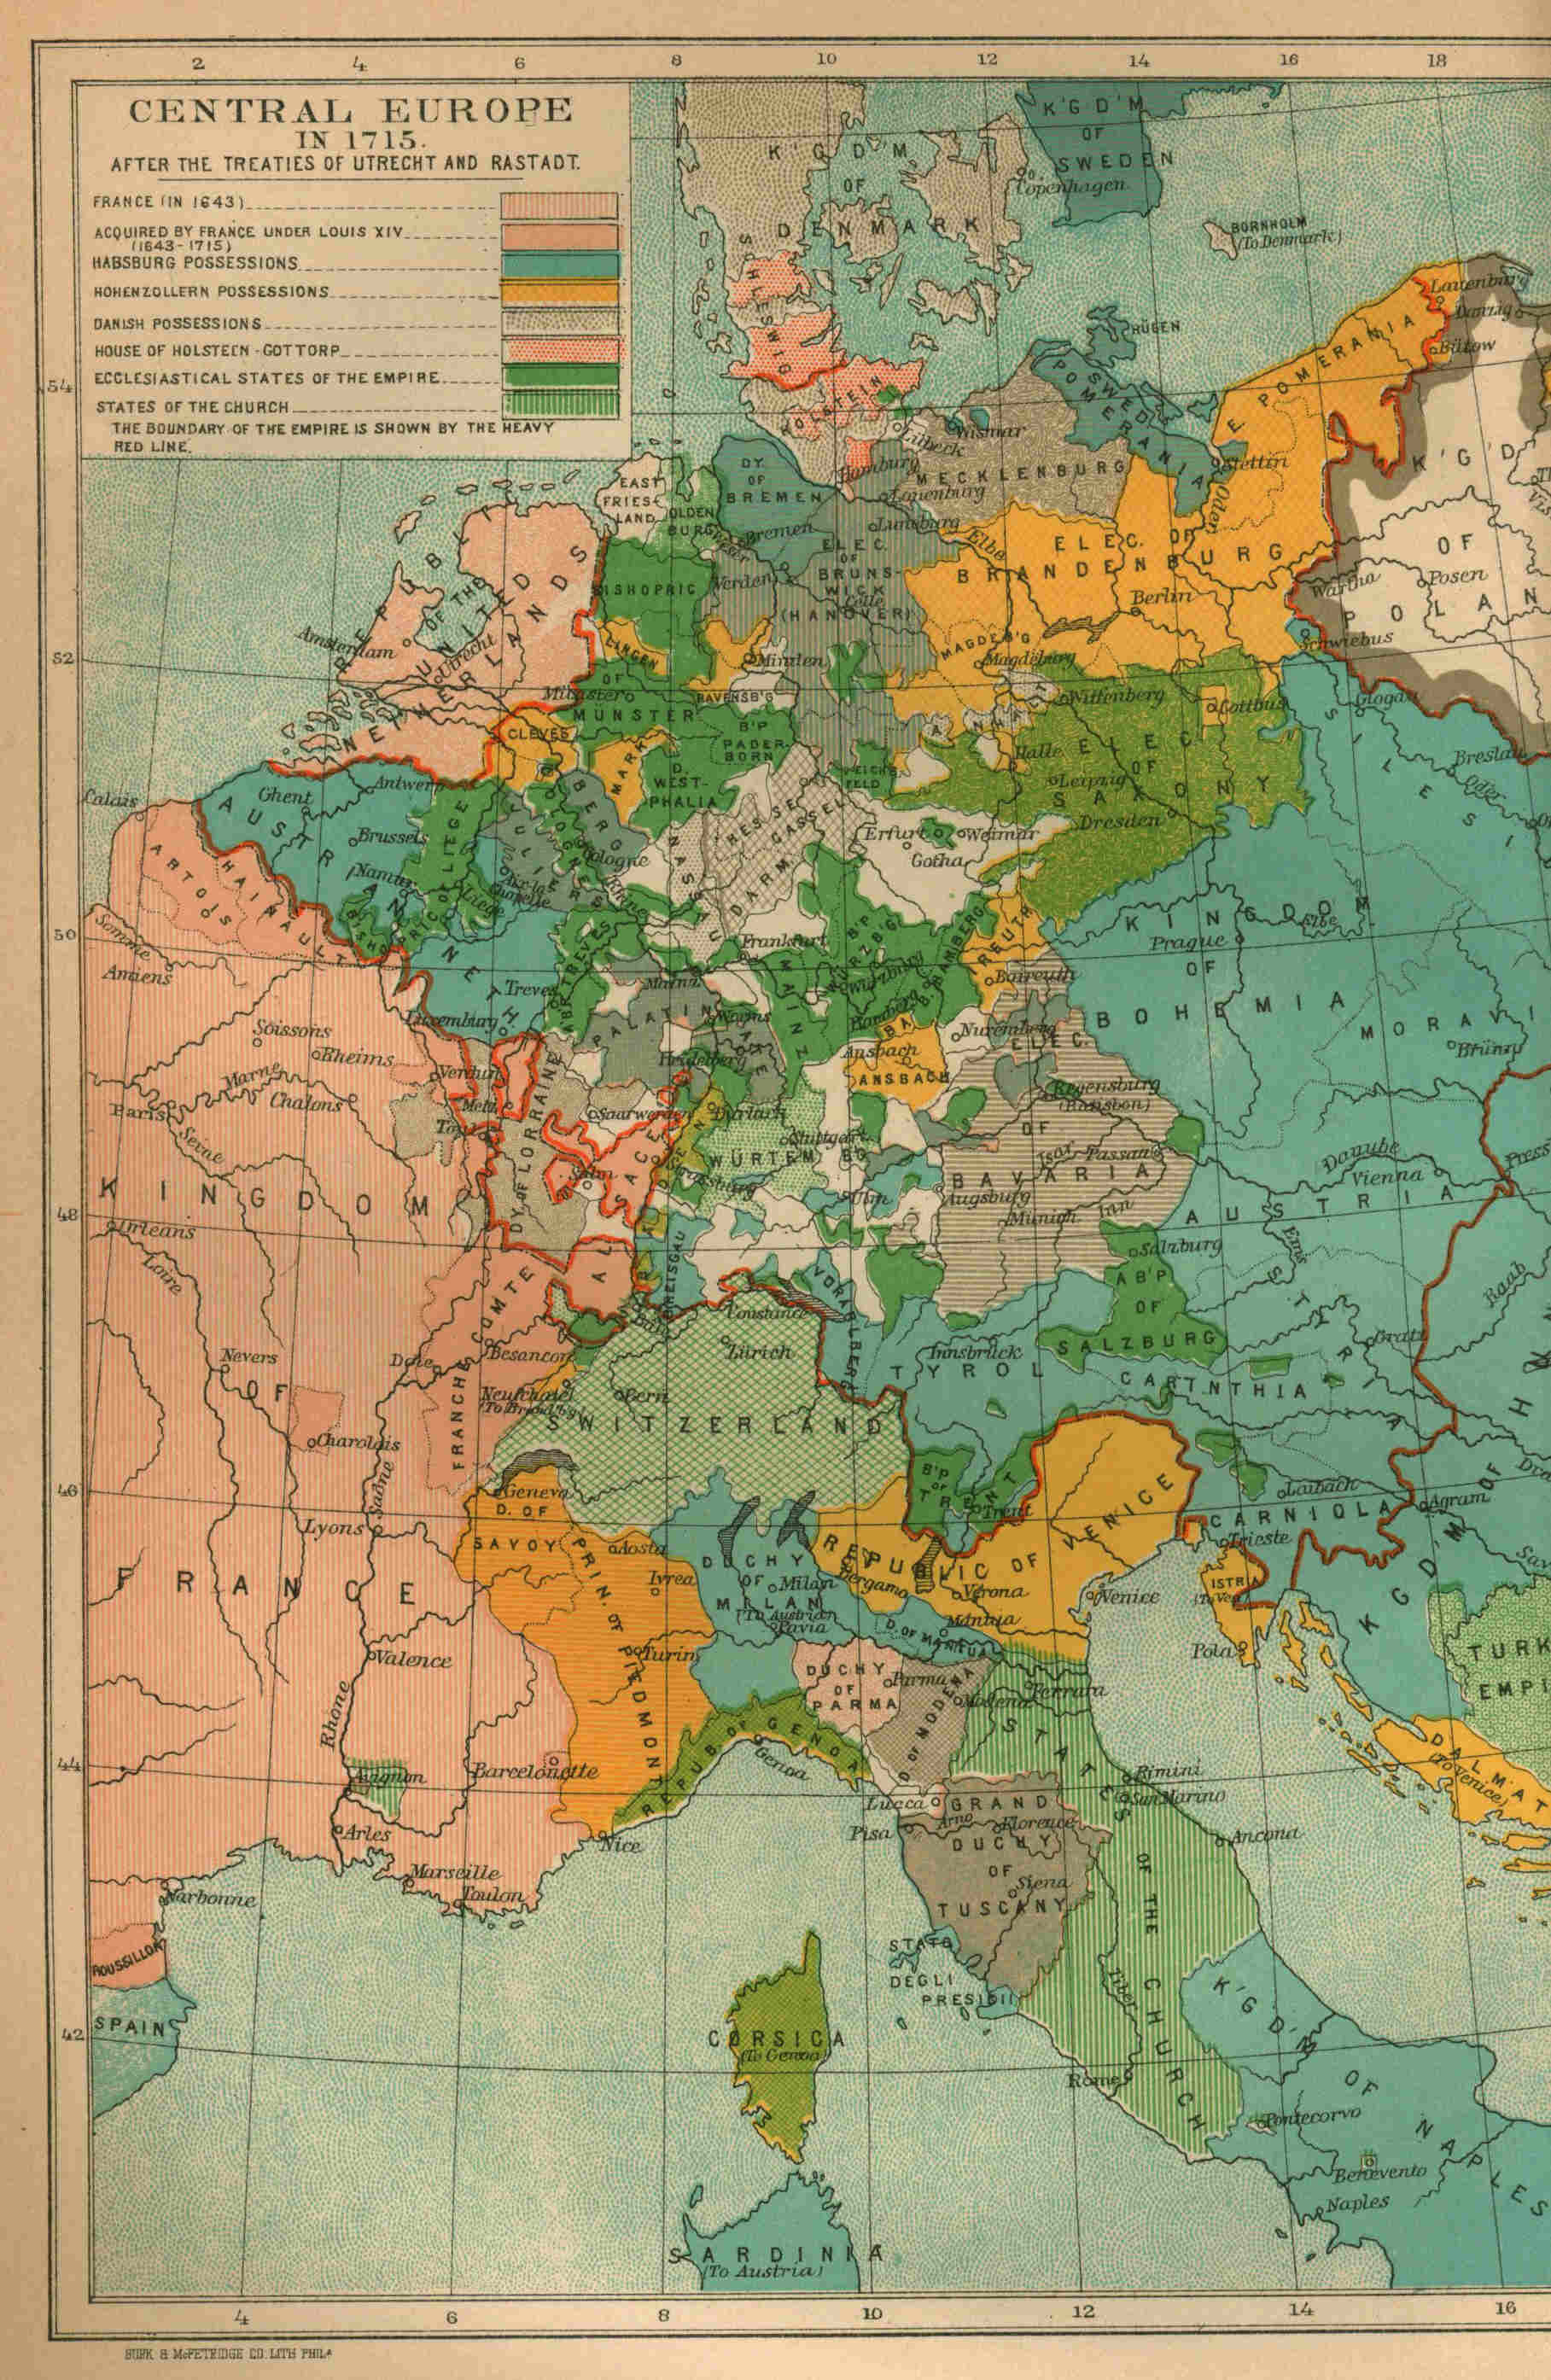 CENTRAL EUROPE IN 1715